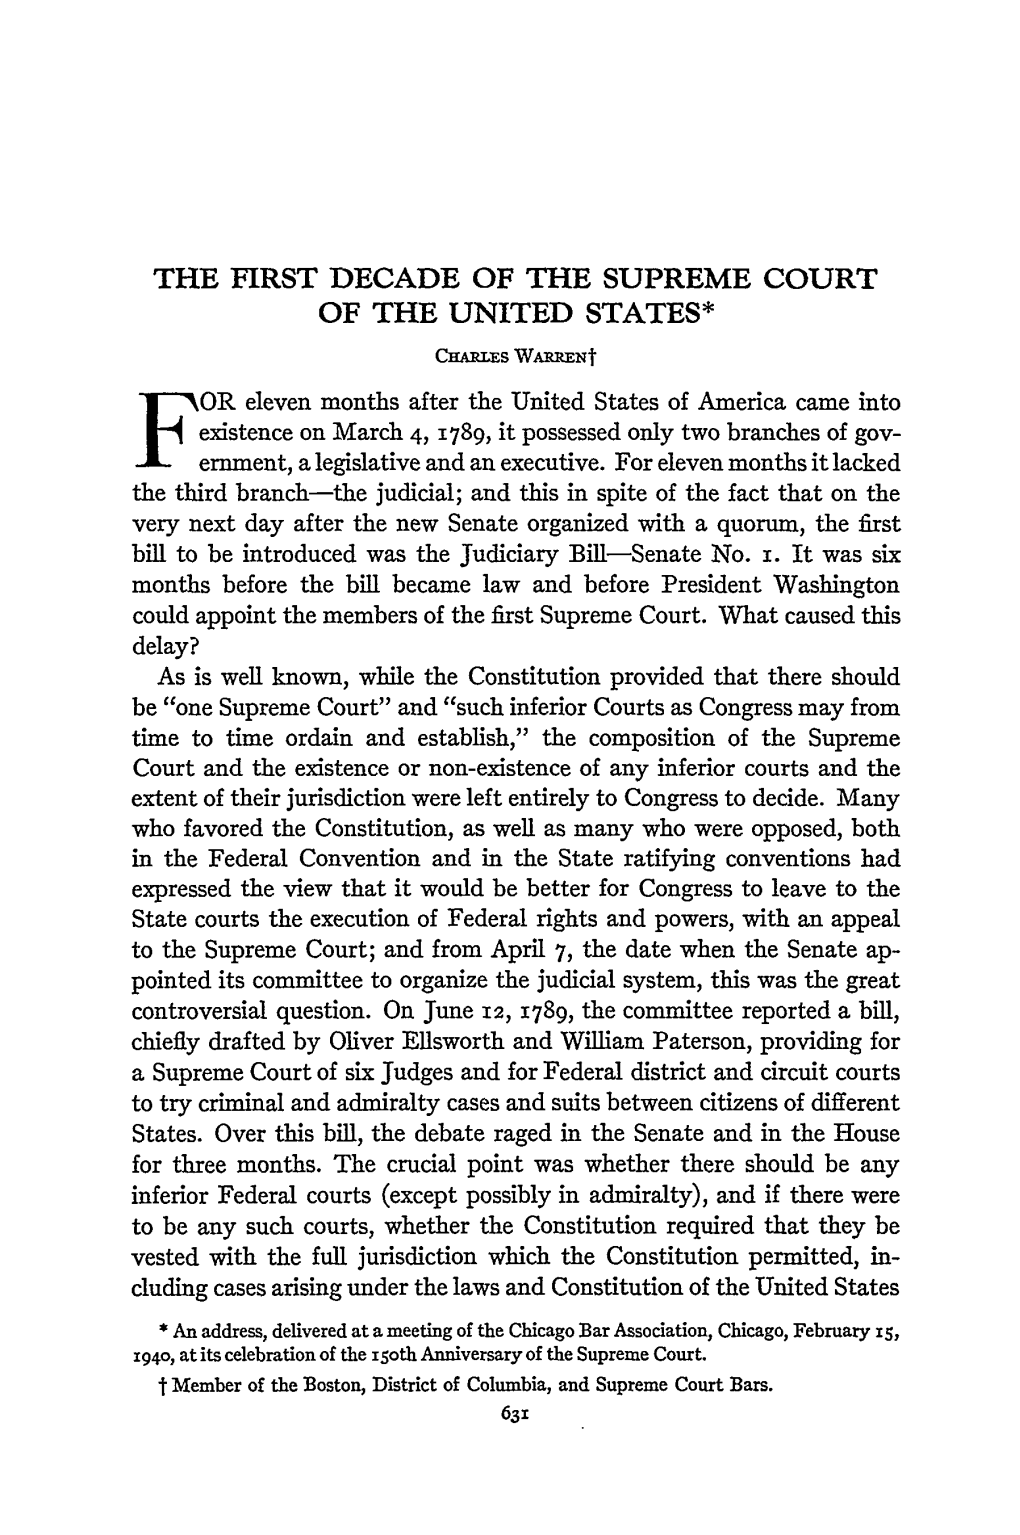 The First Decade of the Supreme Court of the United States*